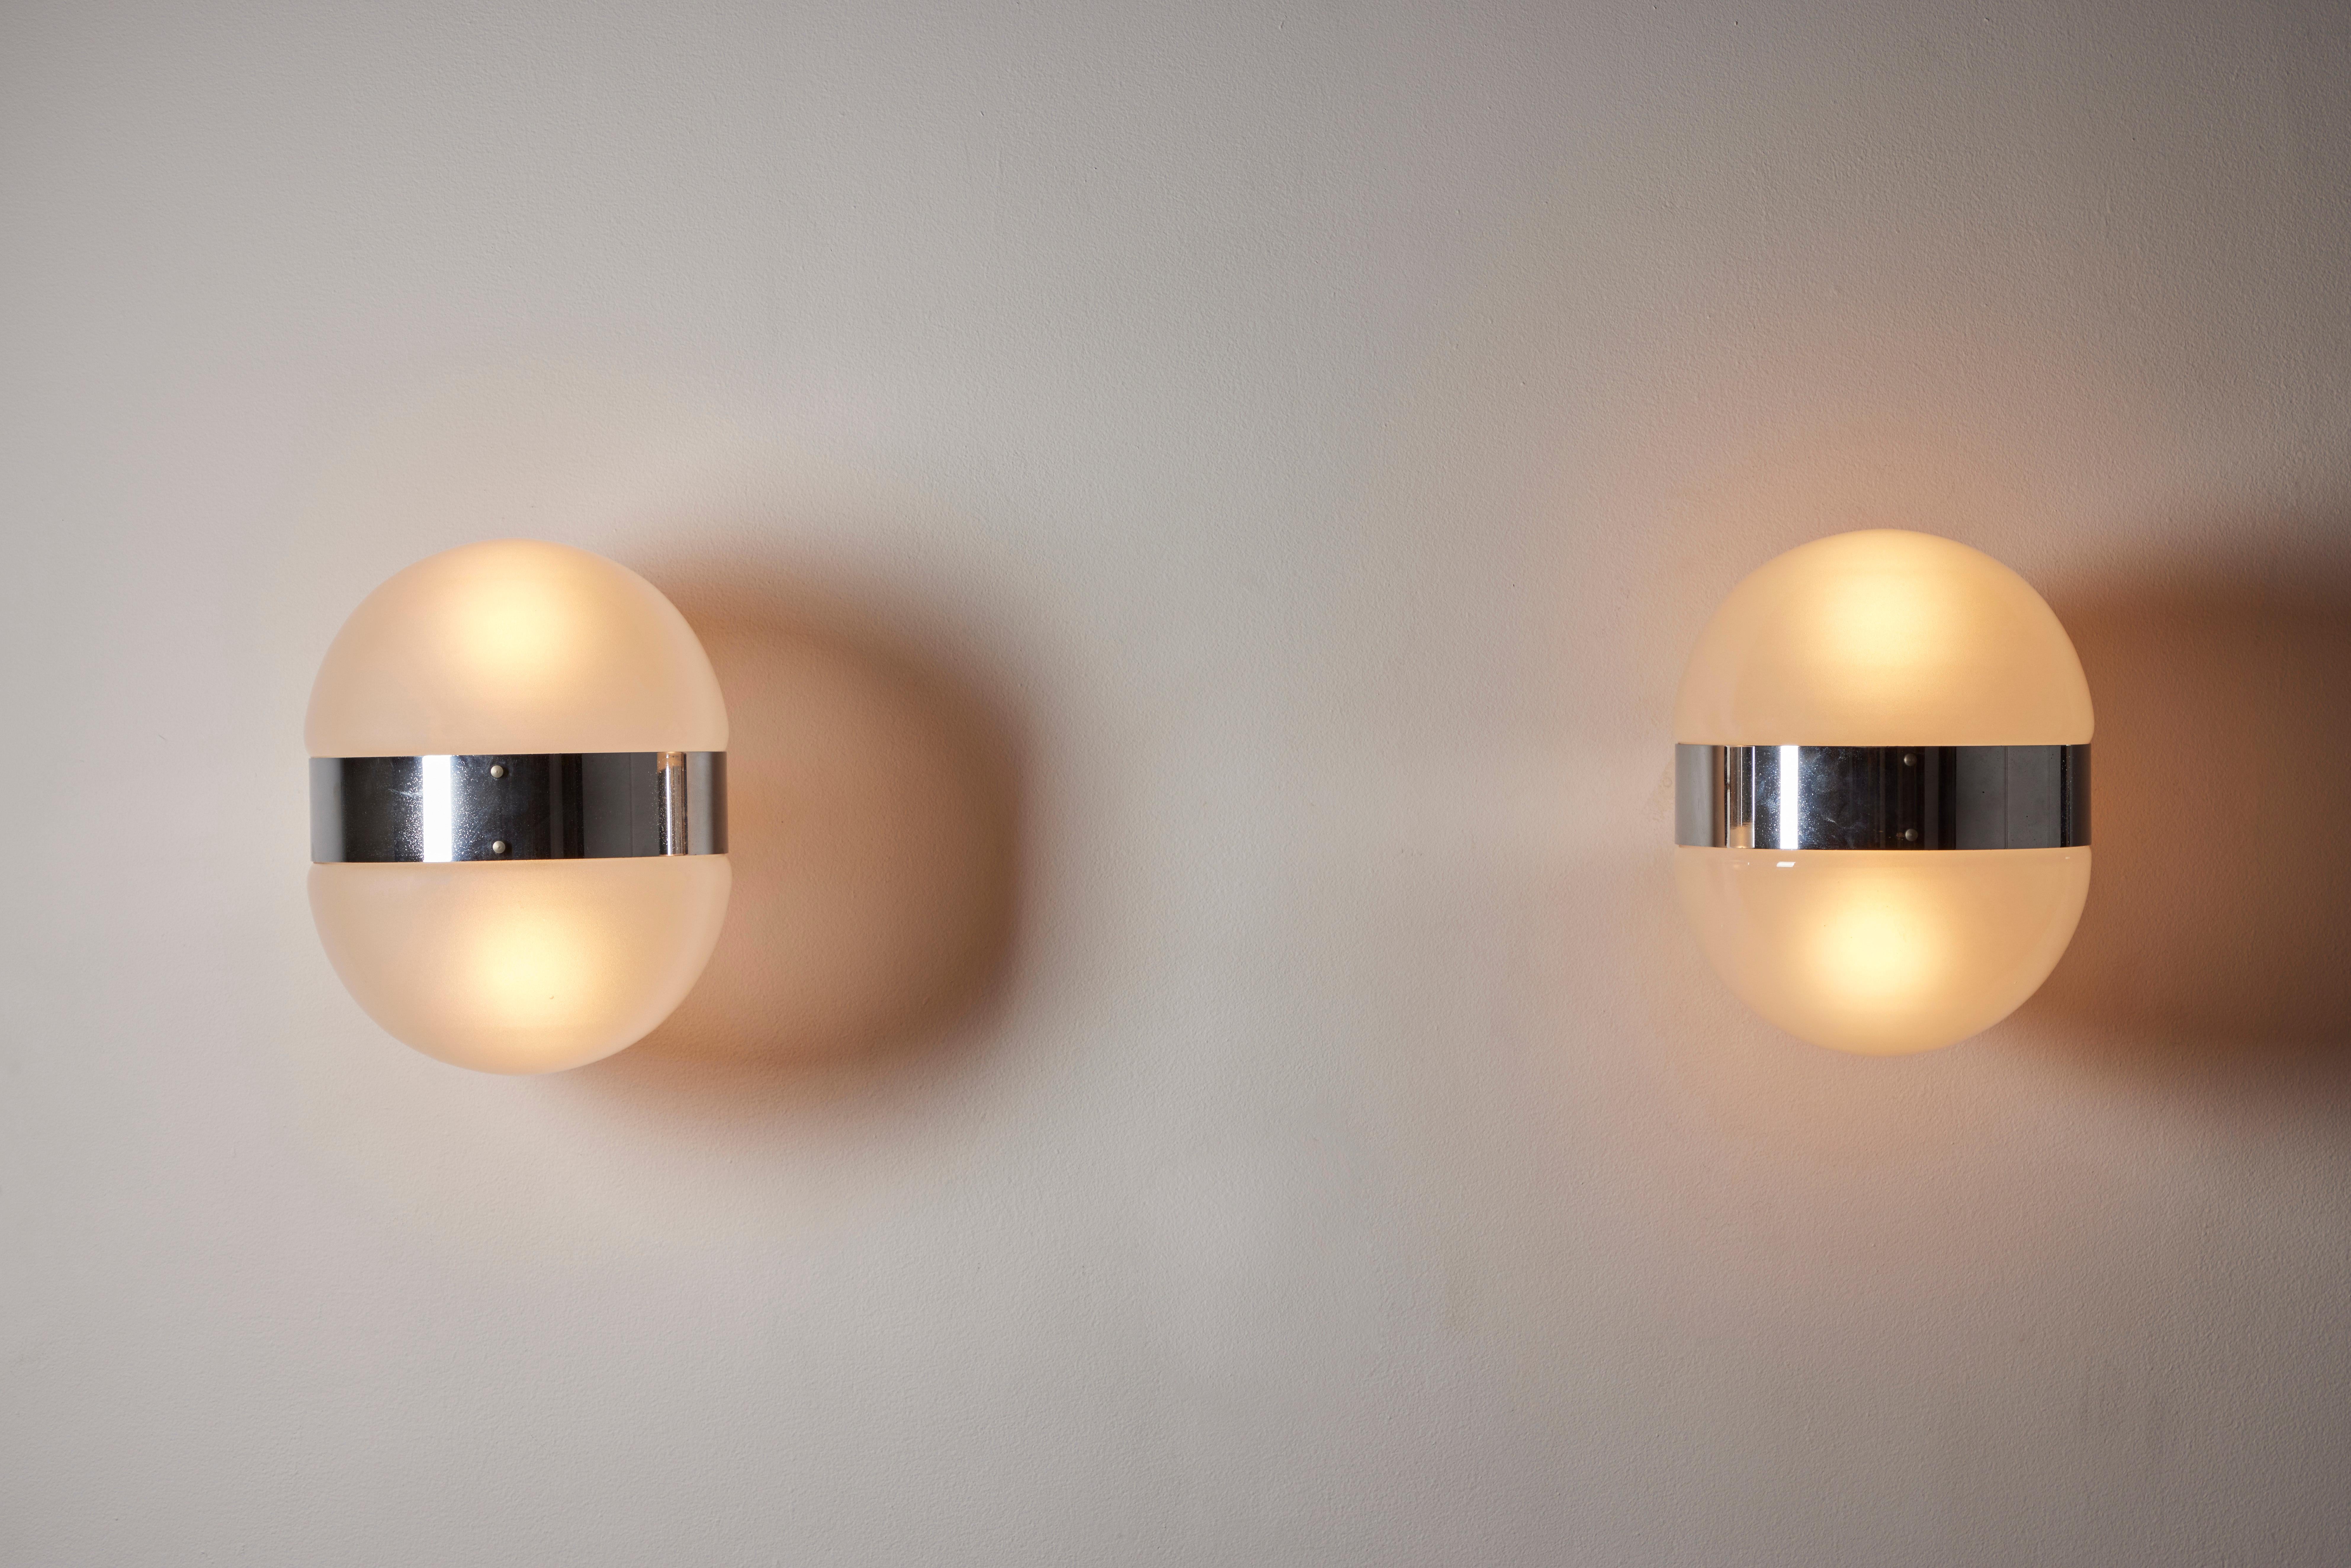 Pair of clio wall or ceiling lights by Sergio Mazza. Designed and manufactured in Italy, circa 1960's. Brushed nickel, opalescent glass. Rewired for U.S. standards. We recommend two E27 25W maximum bulbs per fixture. Bulbs not included.